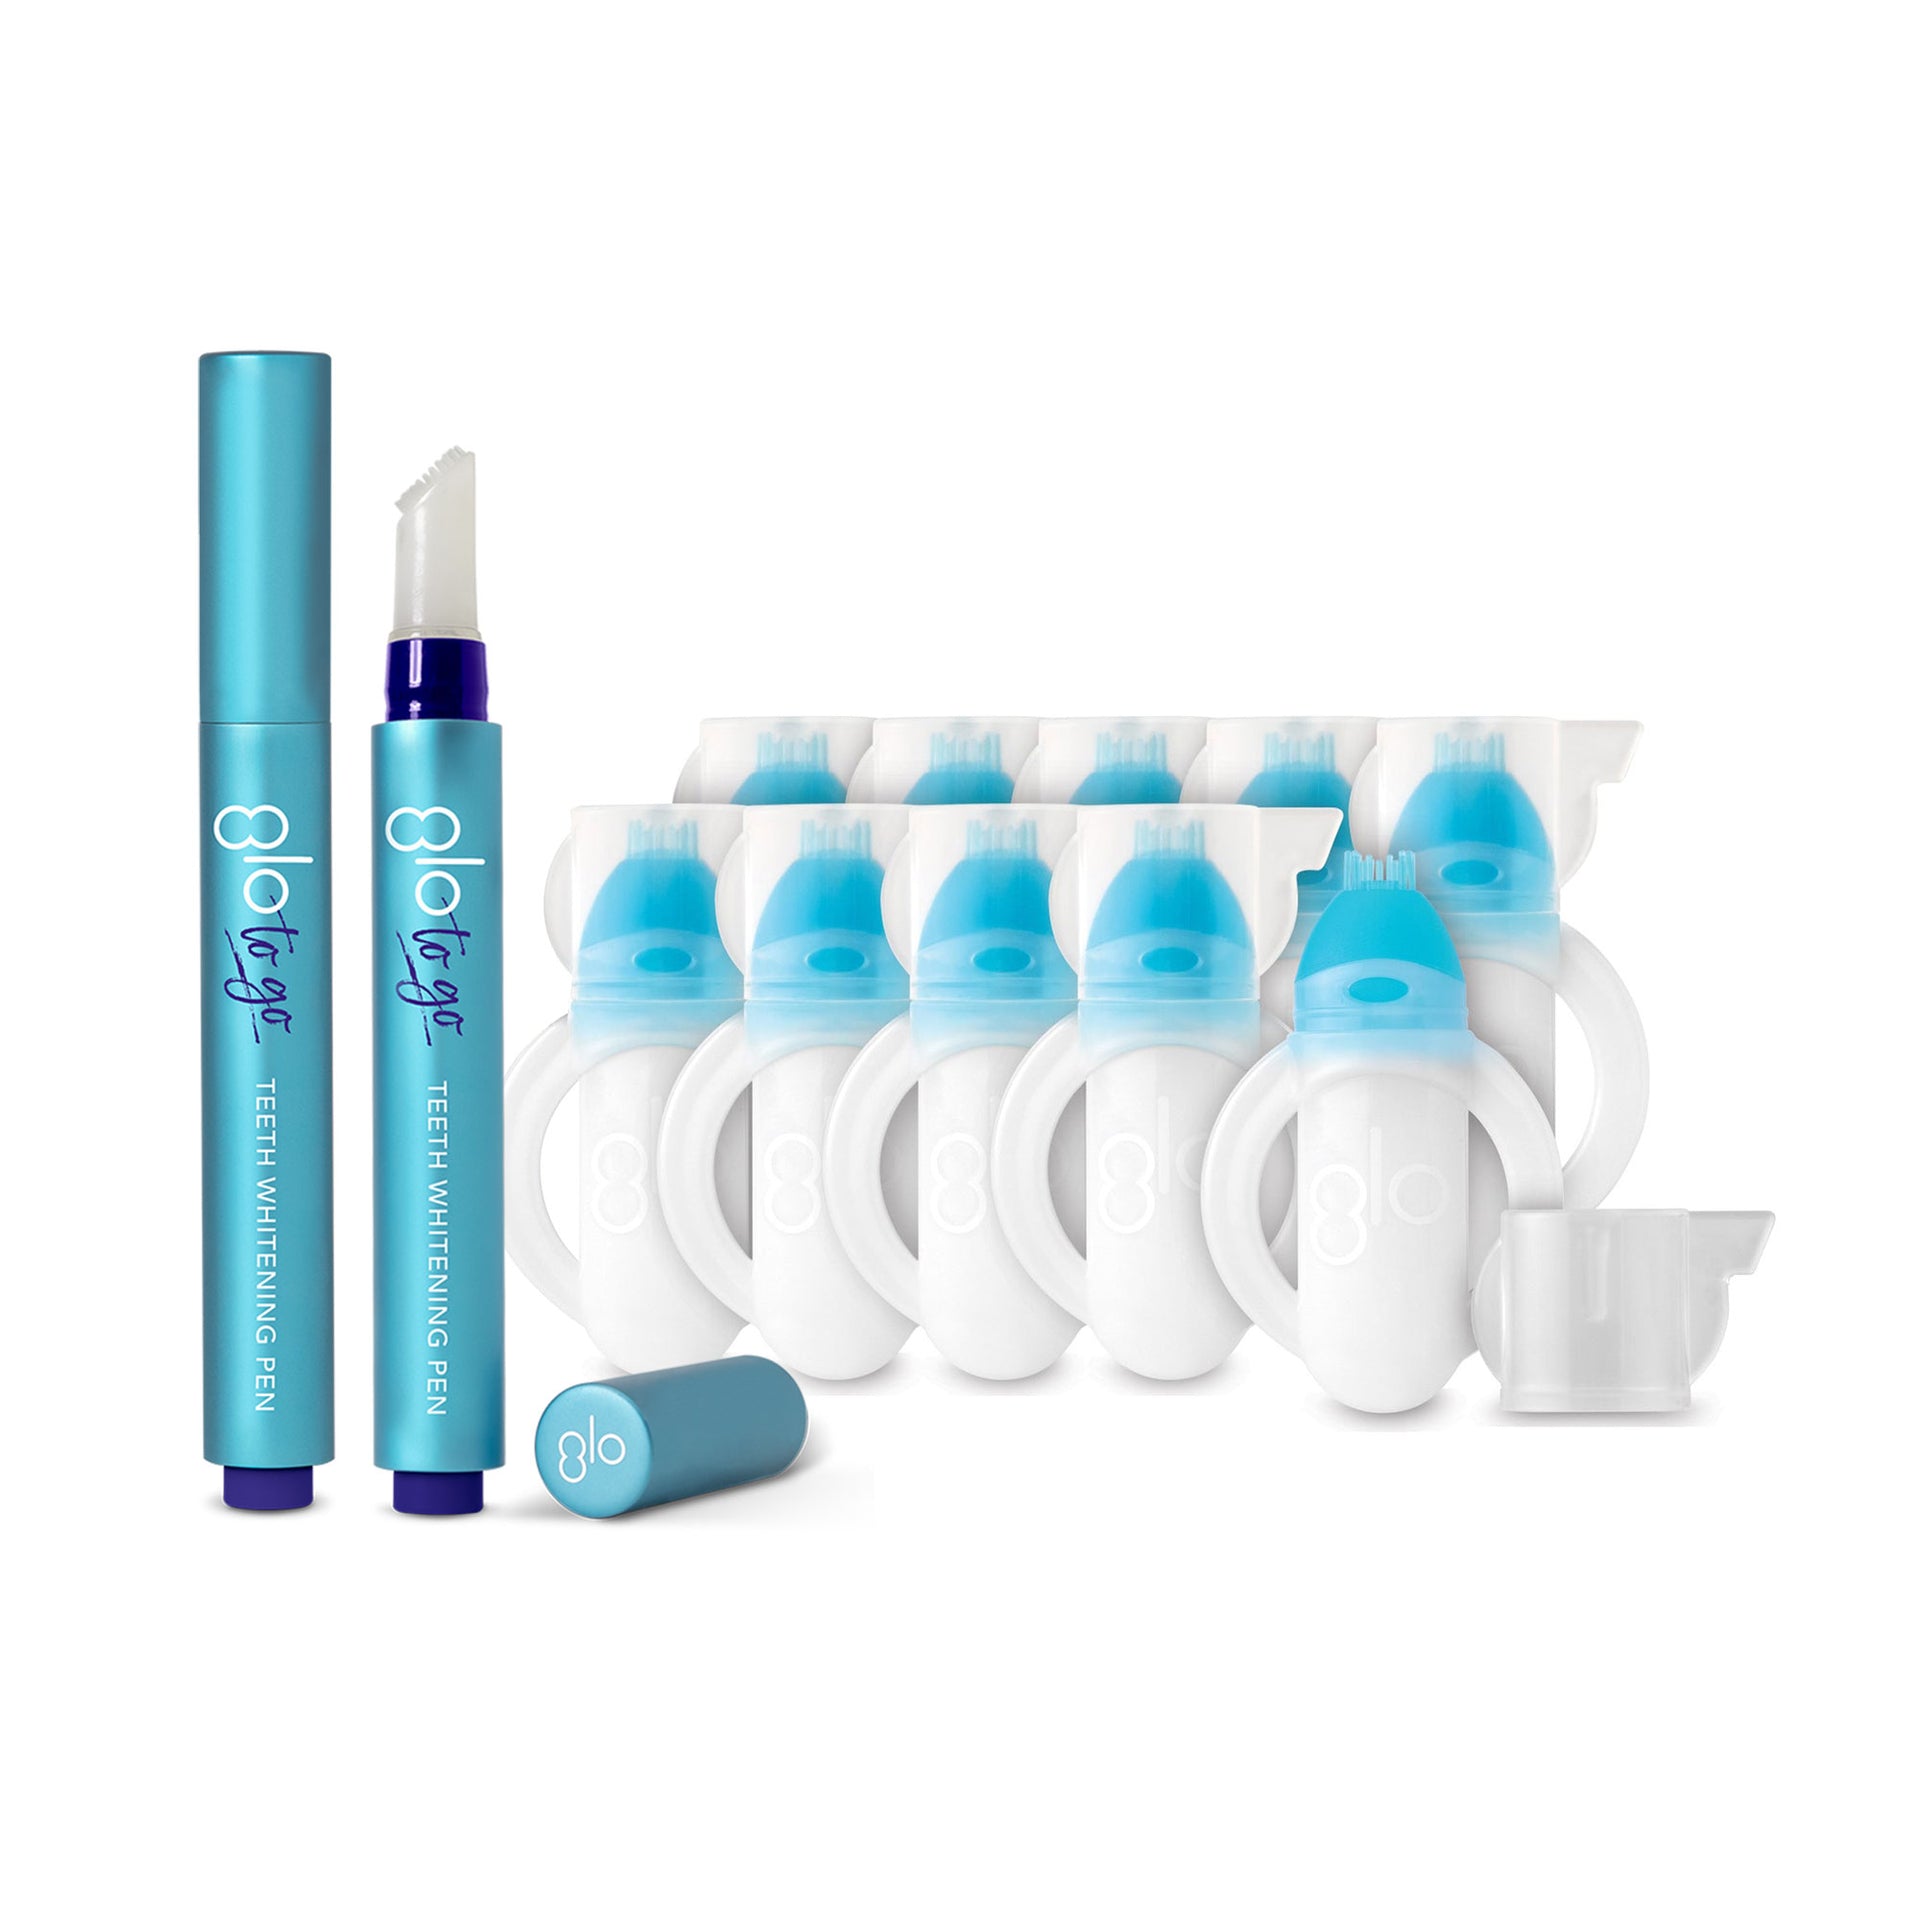 REFILL + ON THE GO DUO BUNDLE